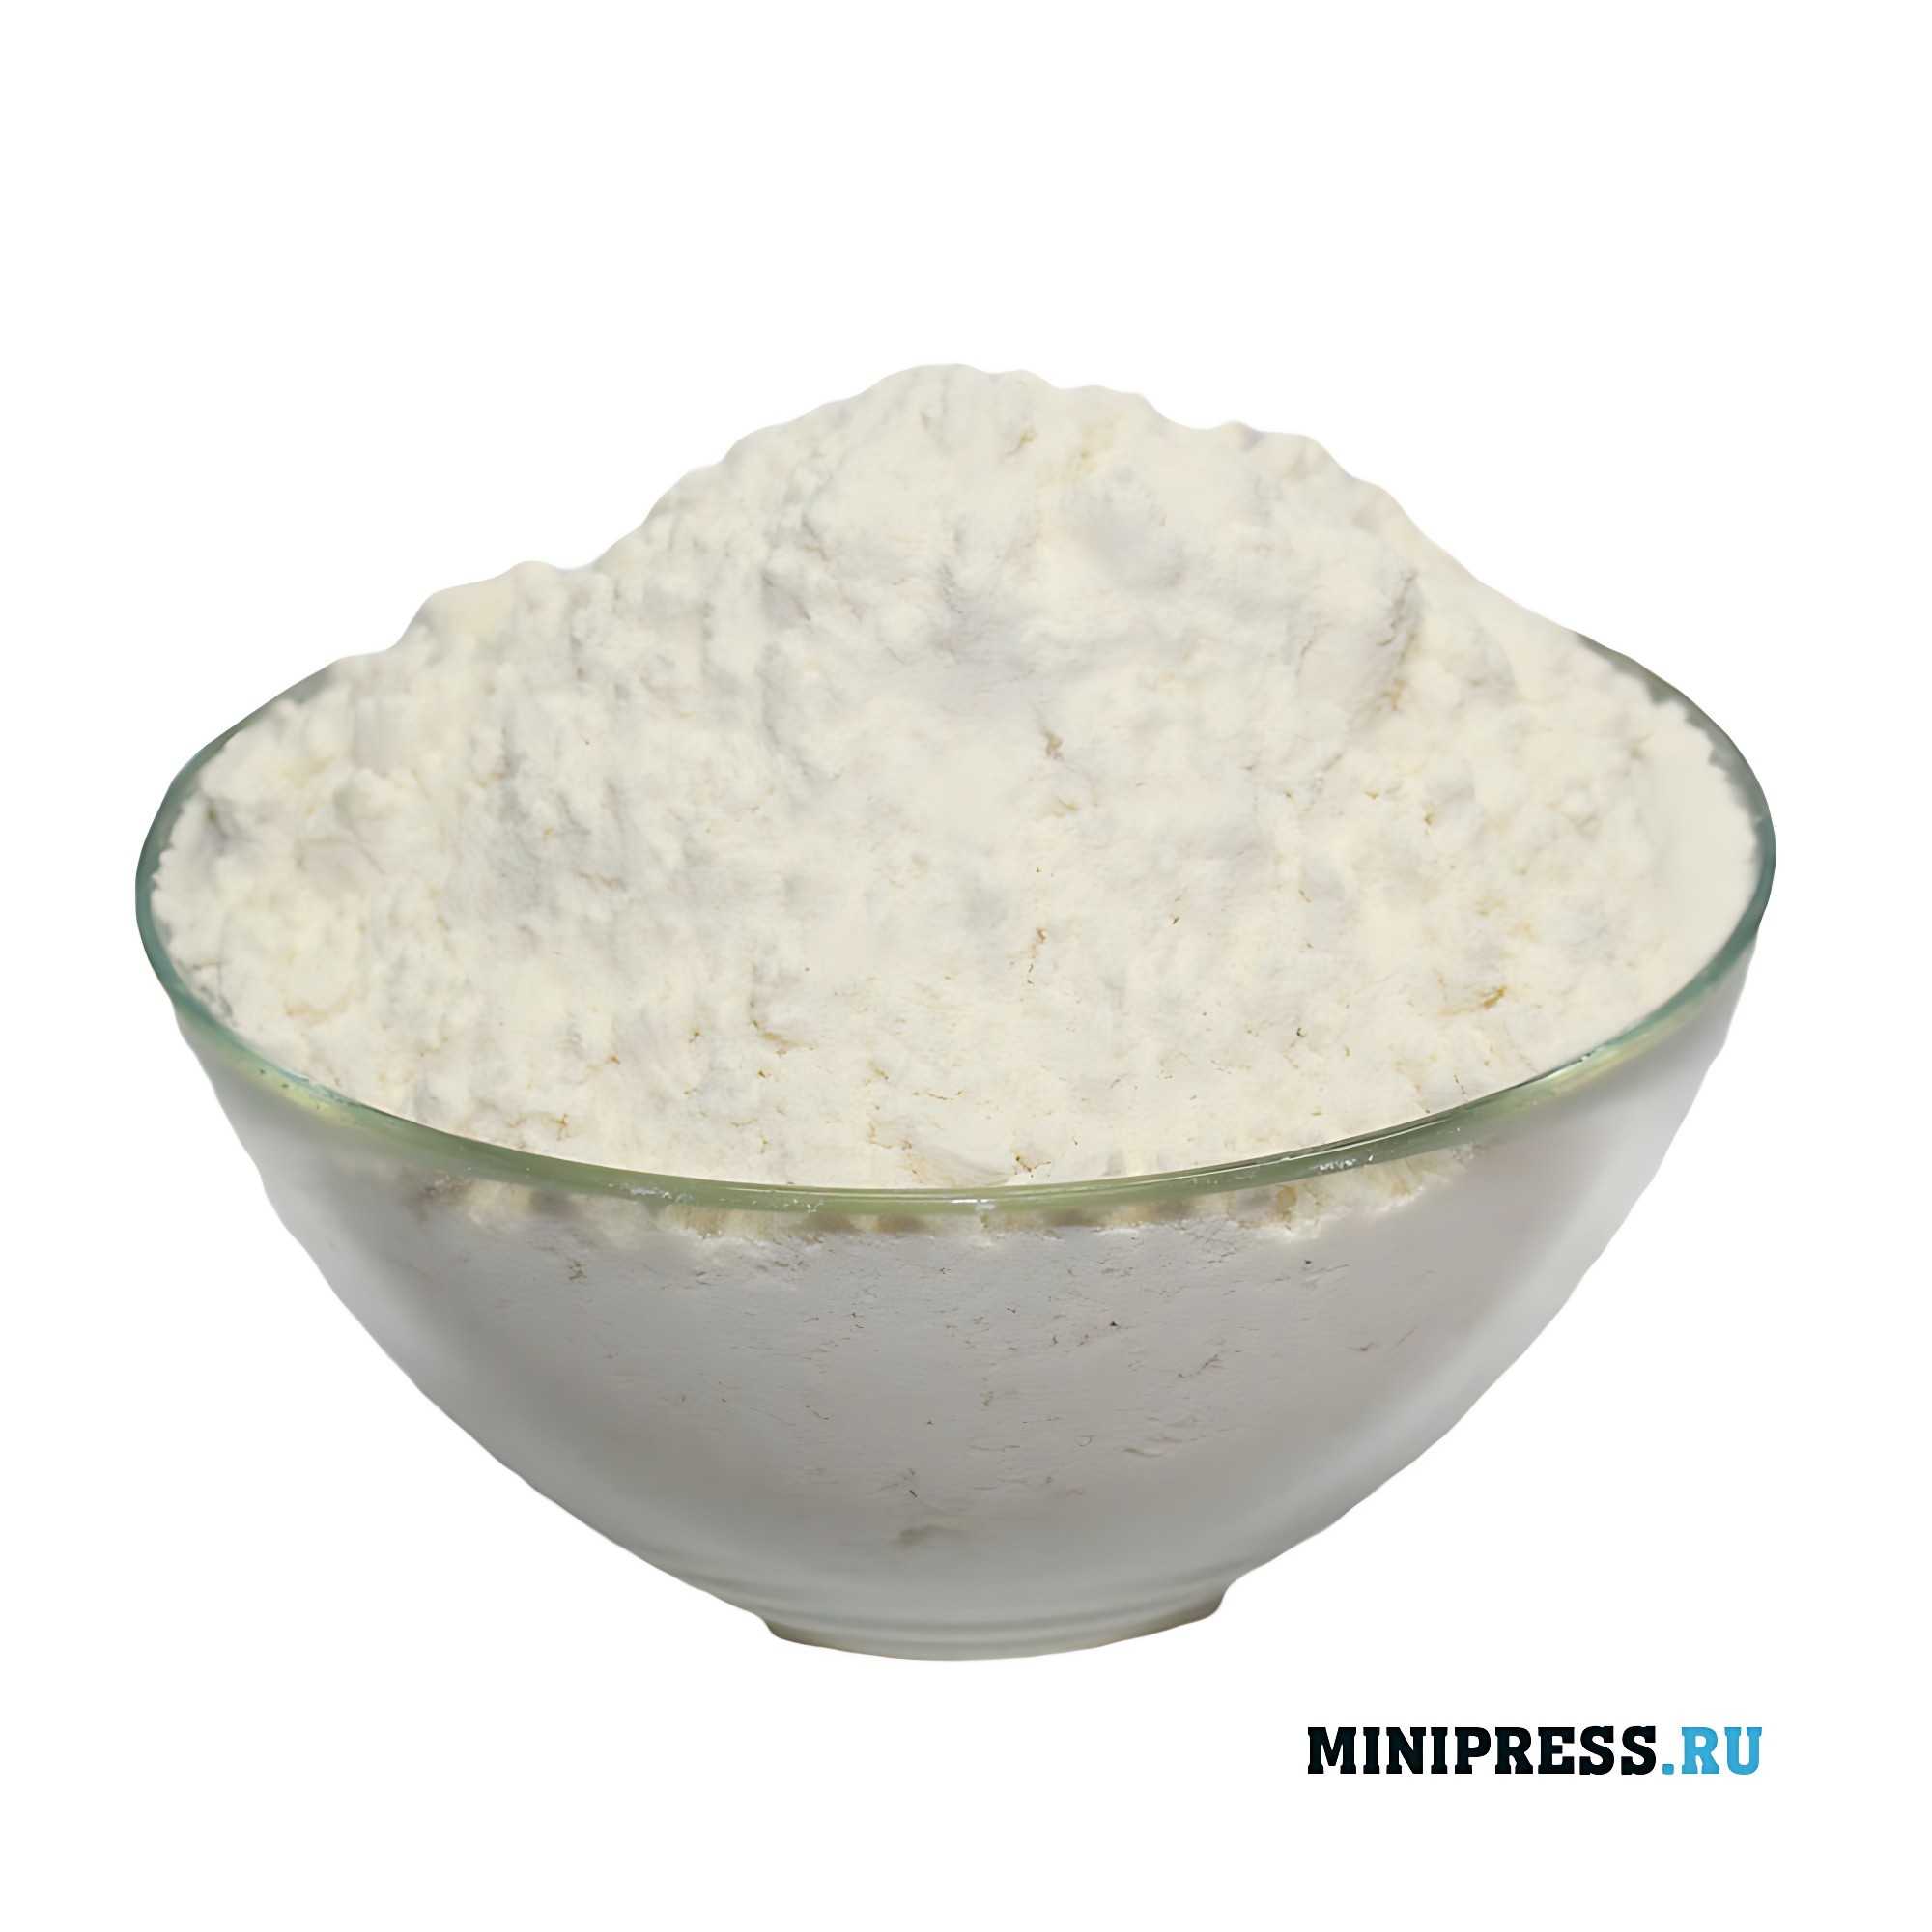 Powders for tablet production